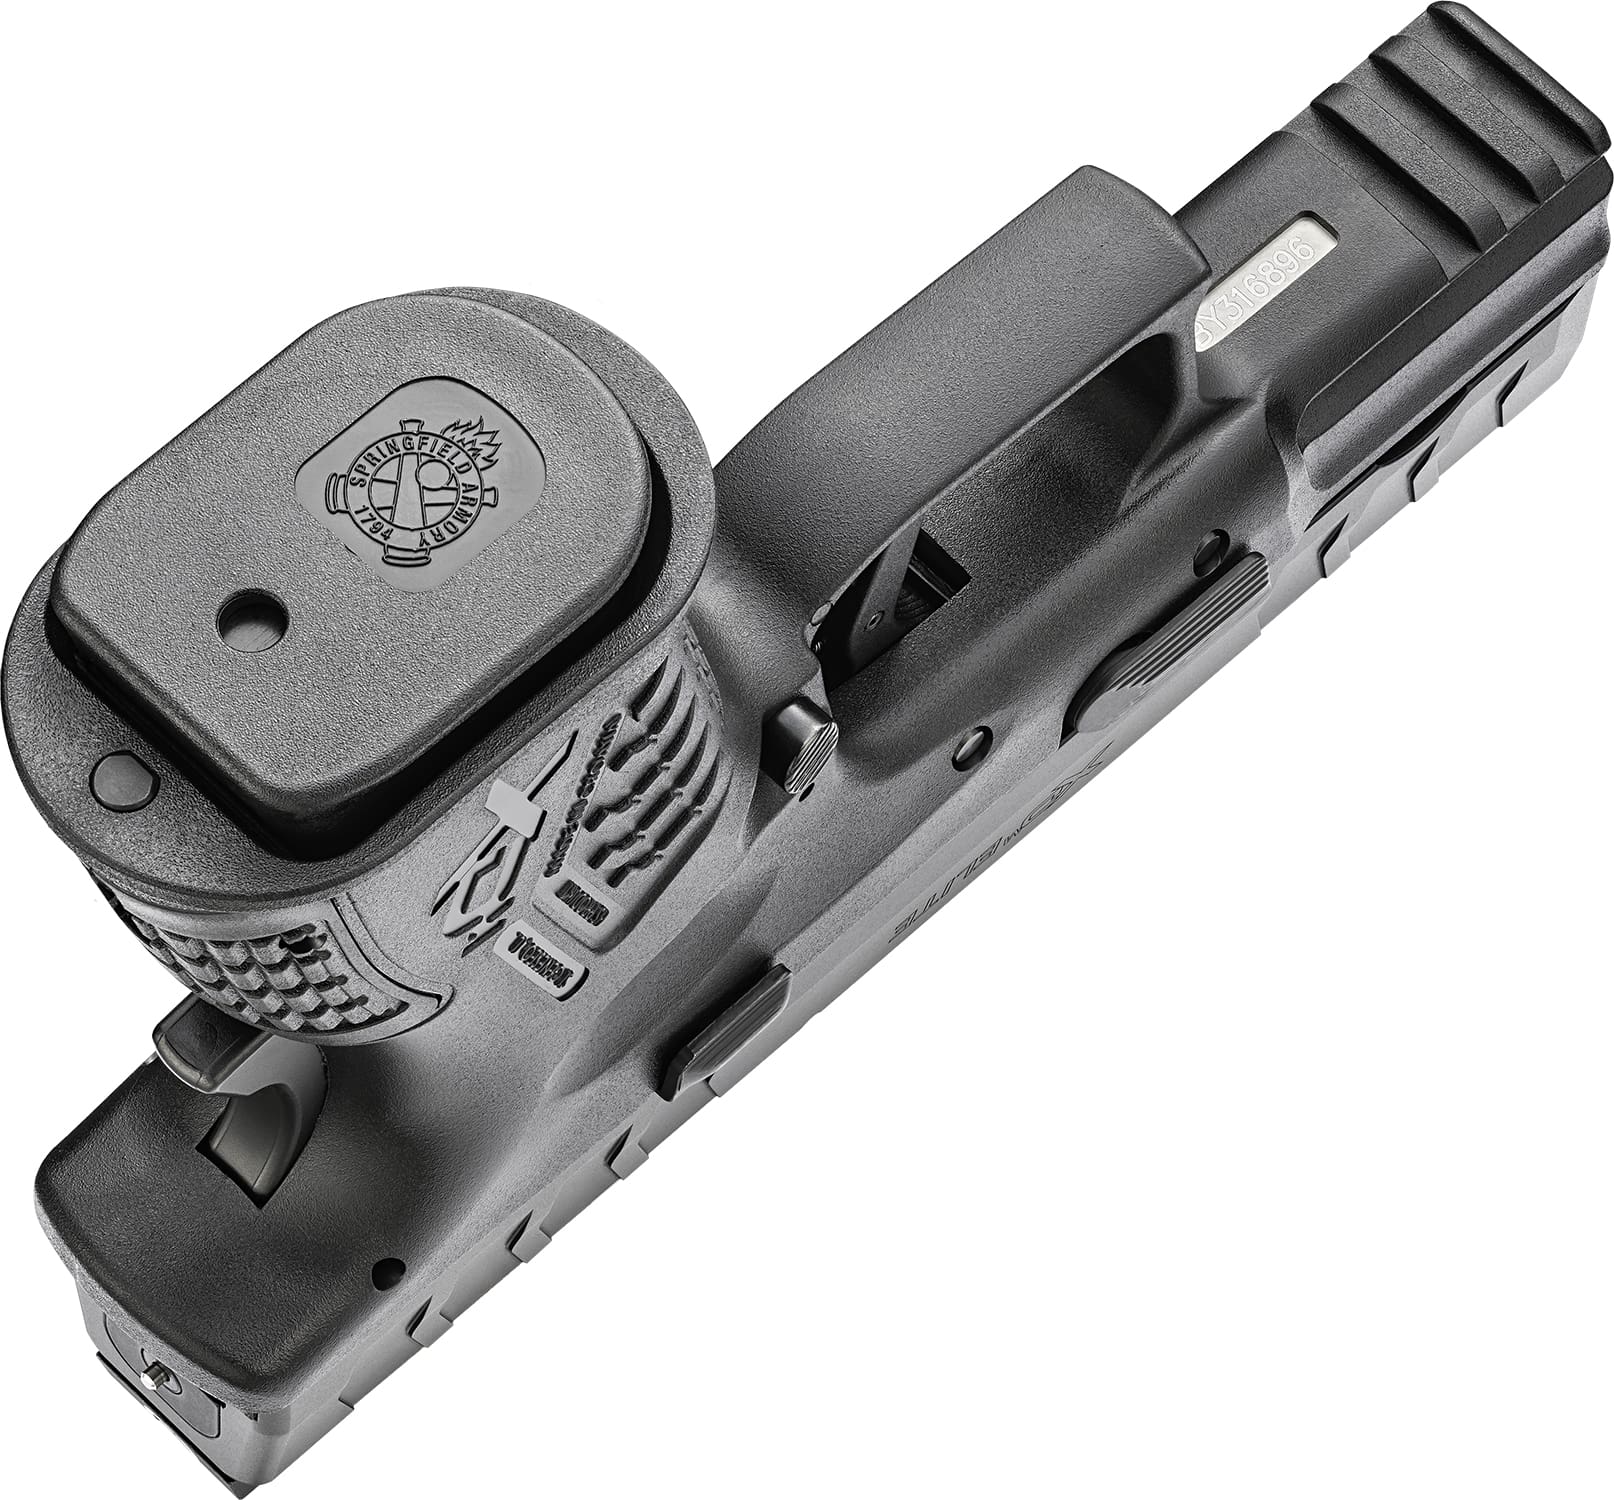 Springfield Armory's New XD-M Elite Series 3.8" Compact